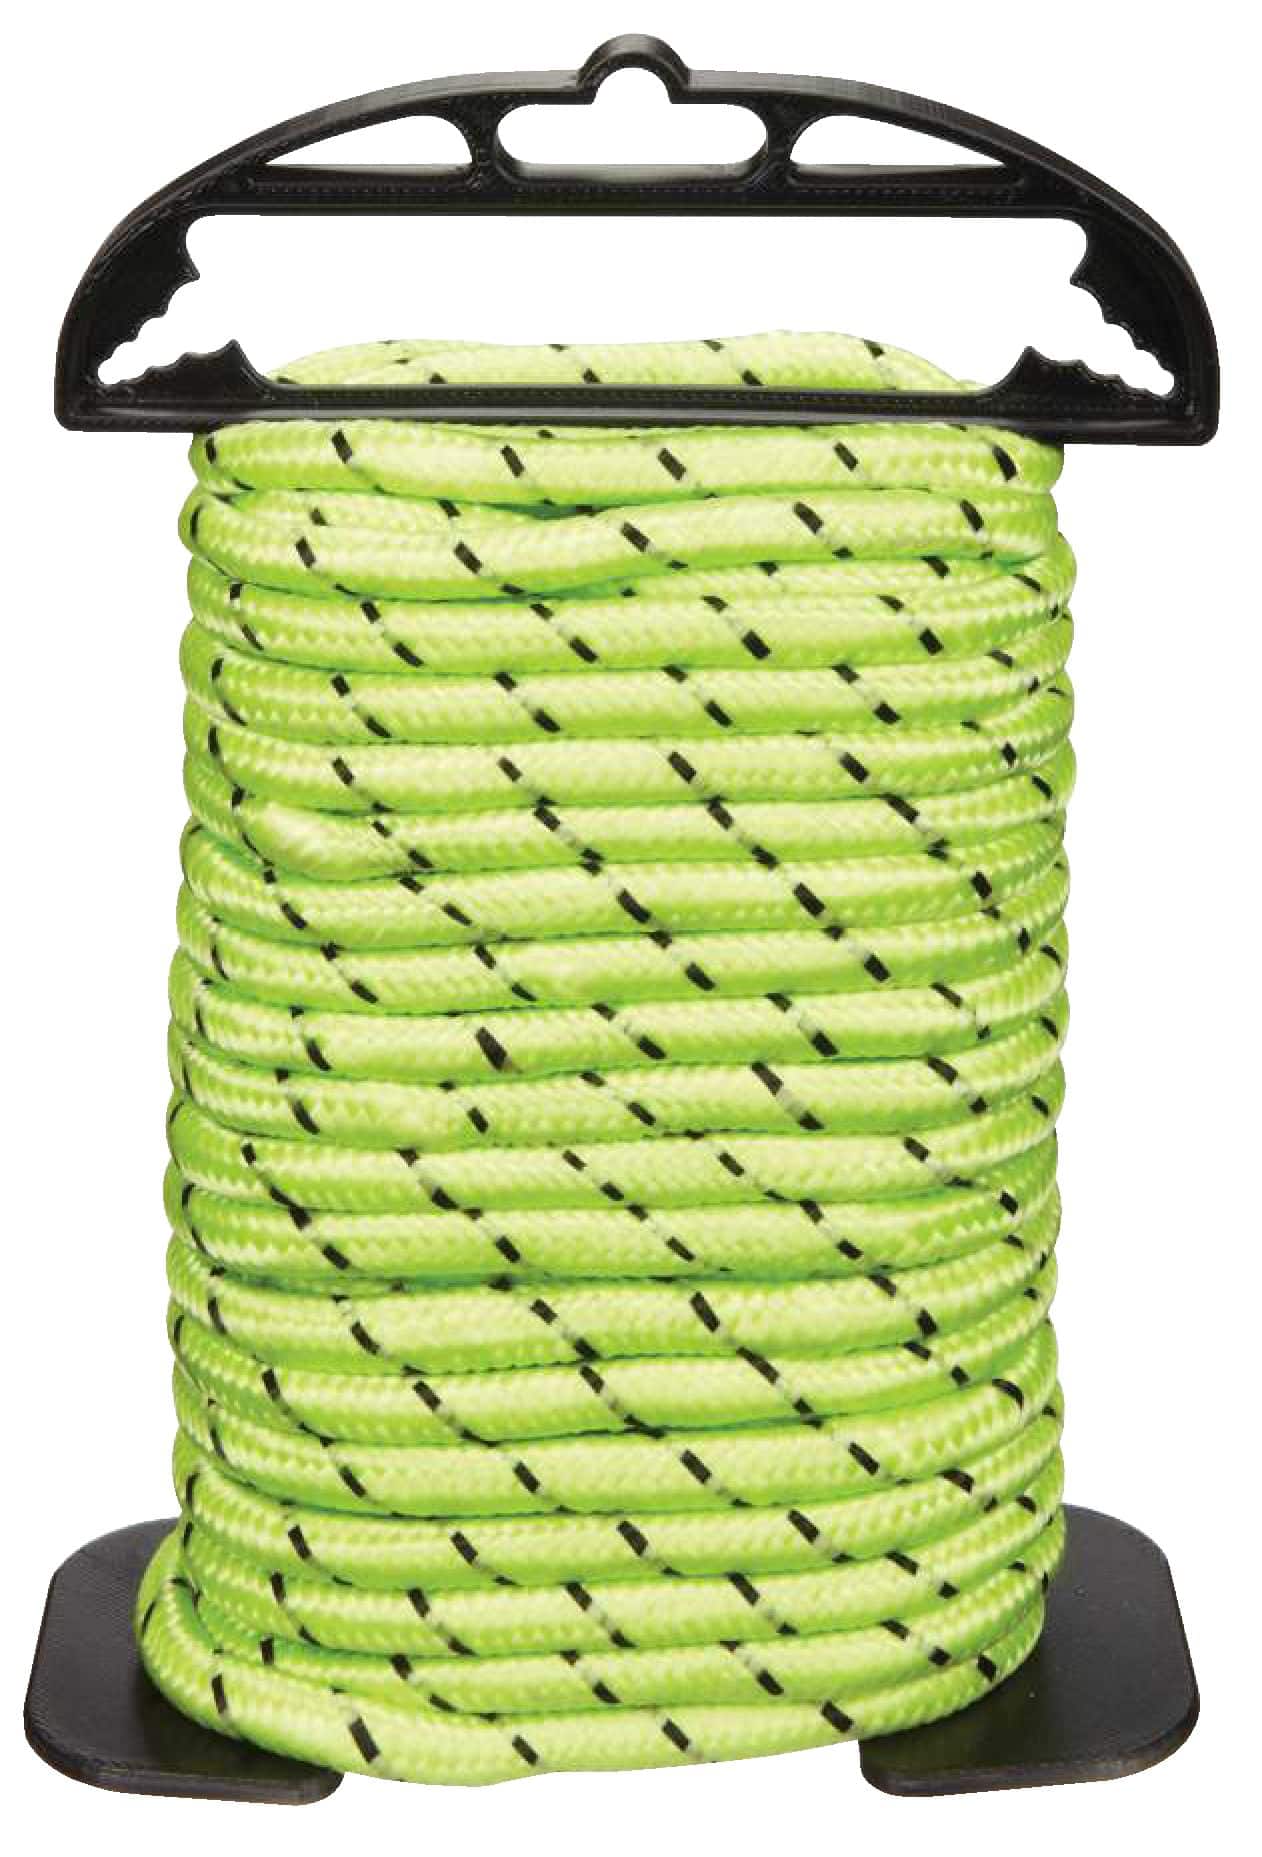 KingCord Glow-in-the-Dark Polypropylene Rope with Holder, High